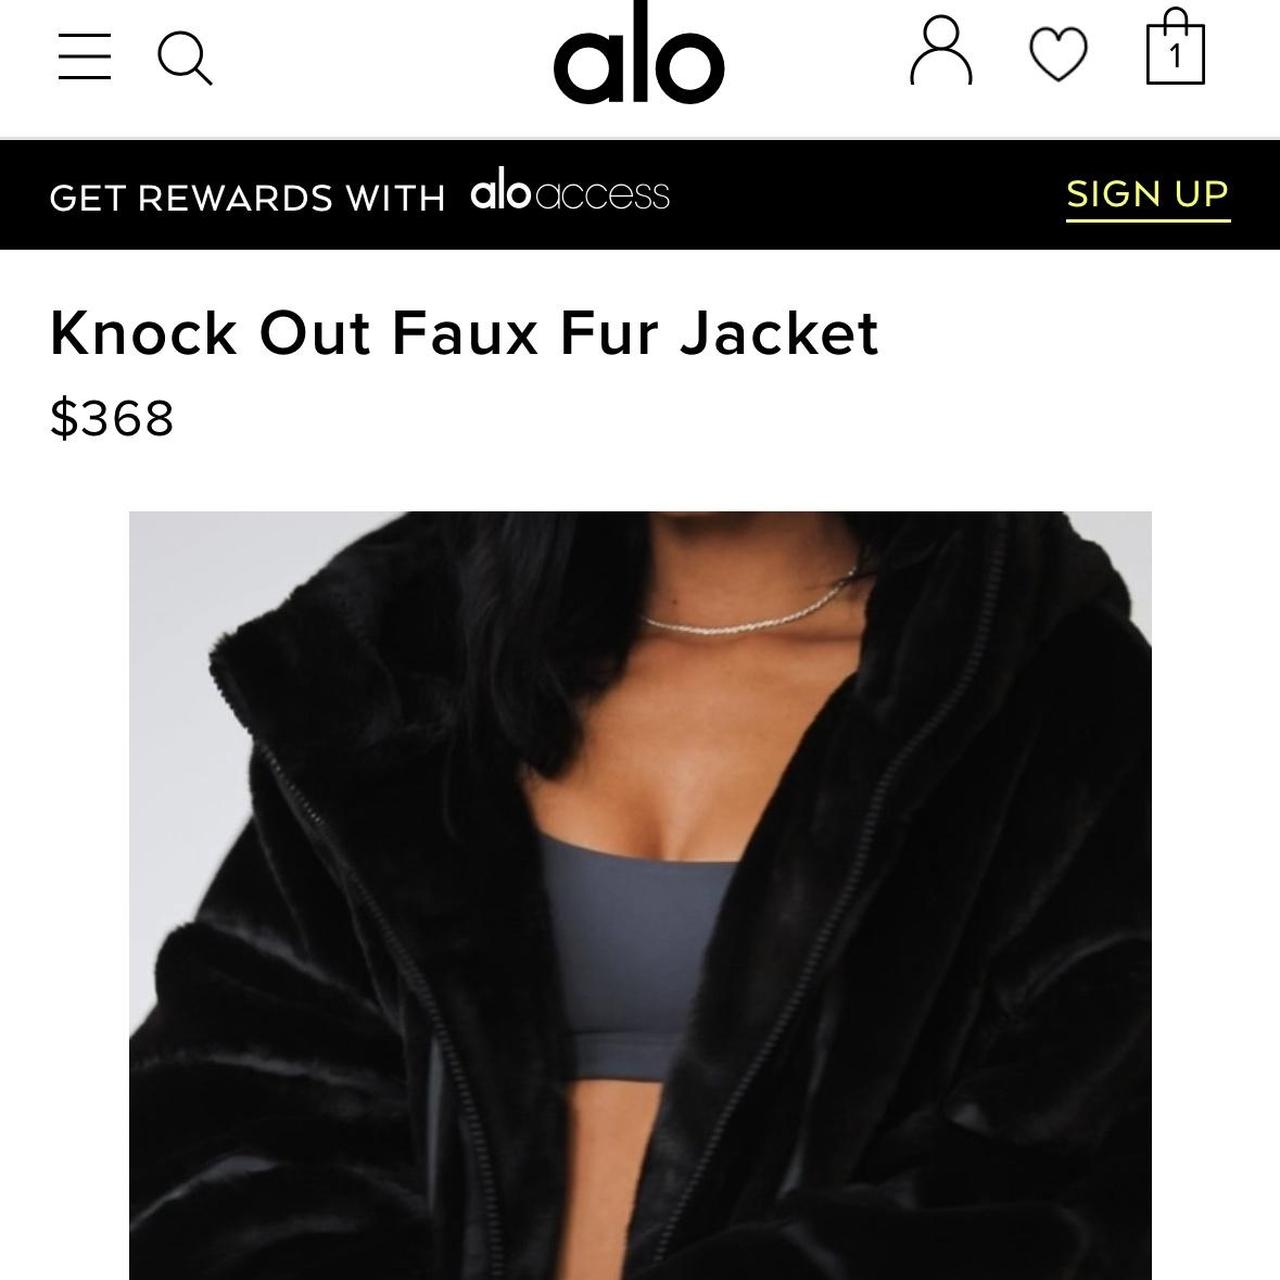 Knock Out Faux Fur Jacket in Brown Size Medium by Alo Yoga